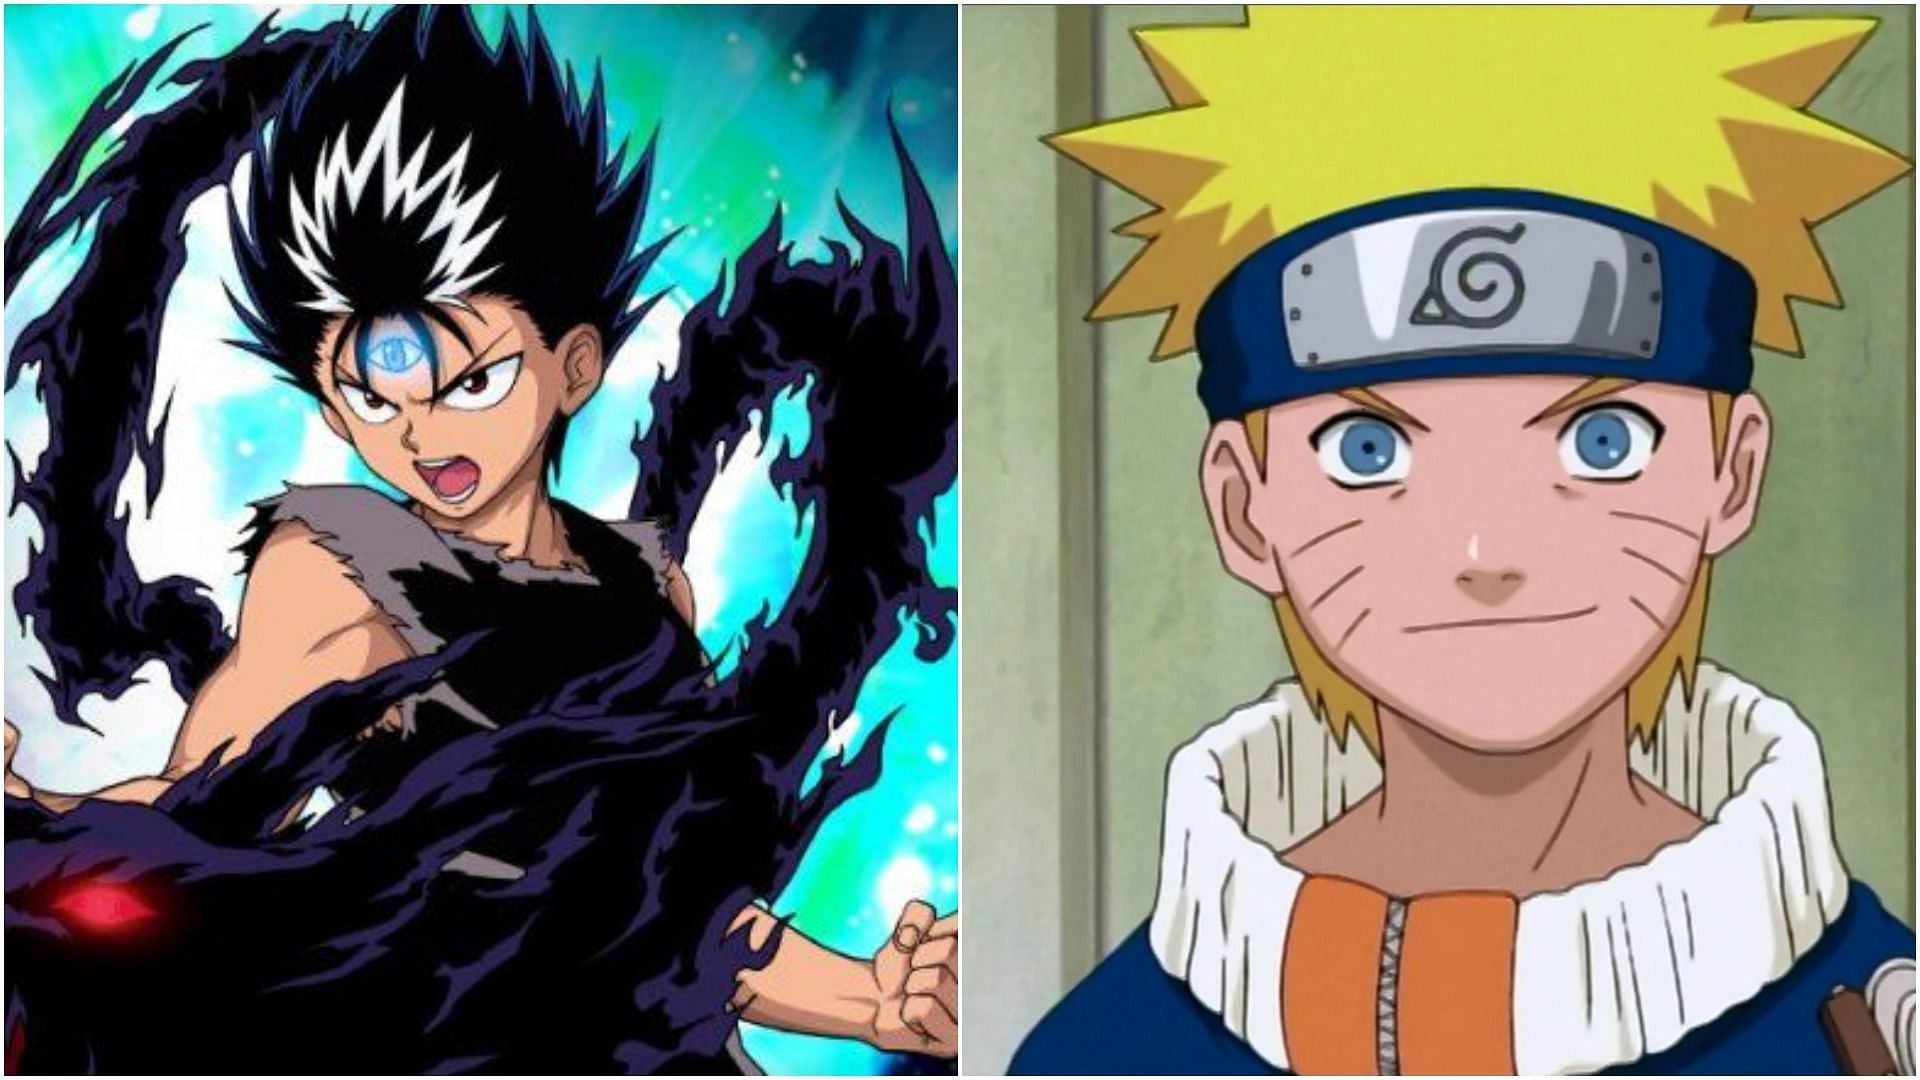 Is Hunter x Hunter a rip off of Naruto? - Quora